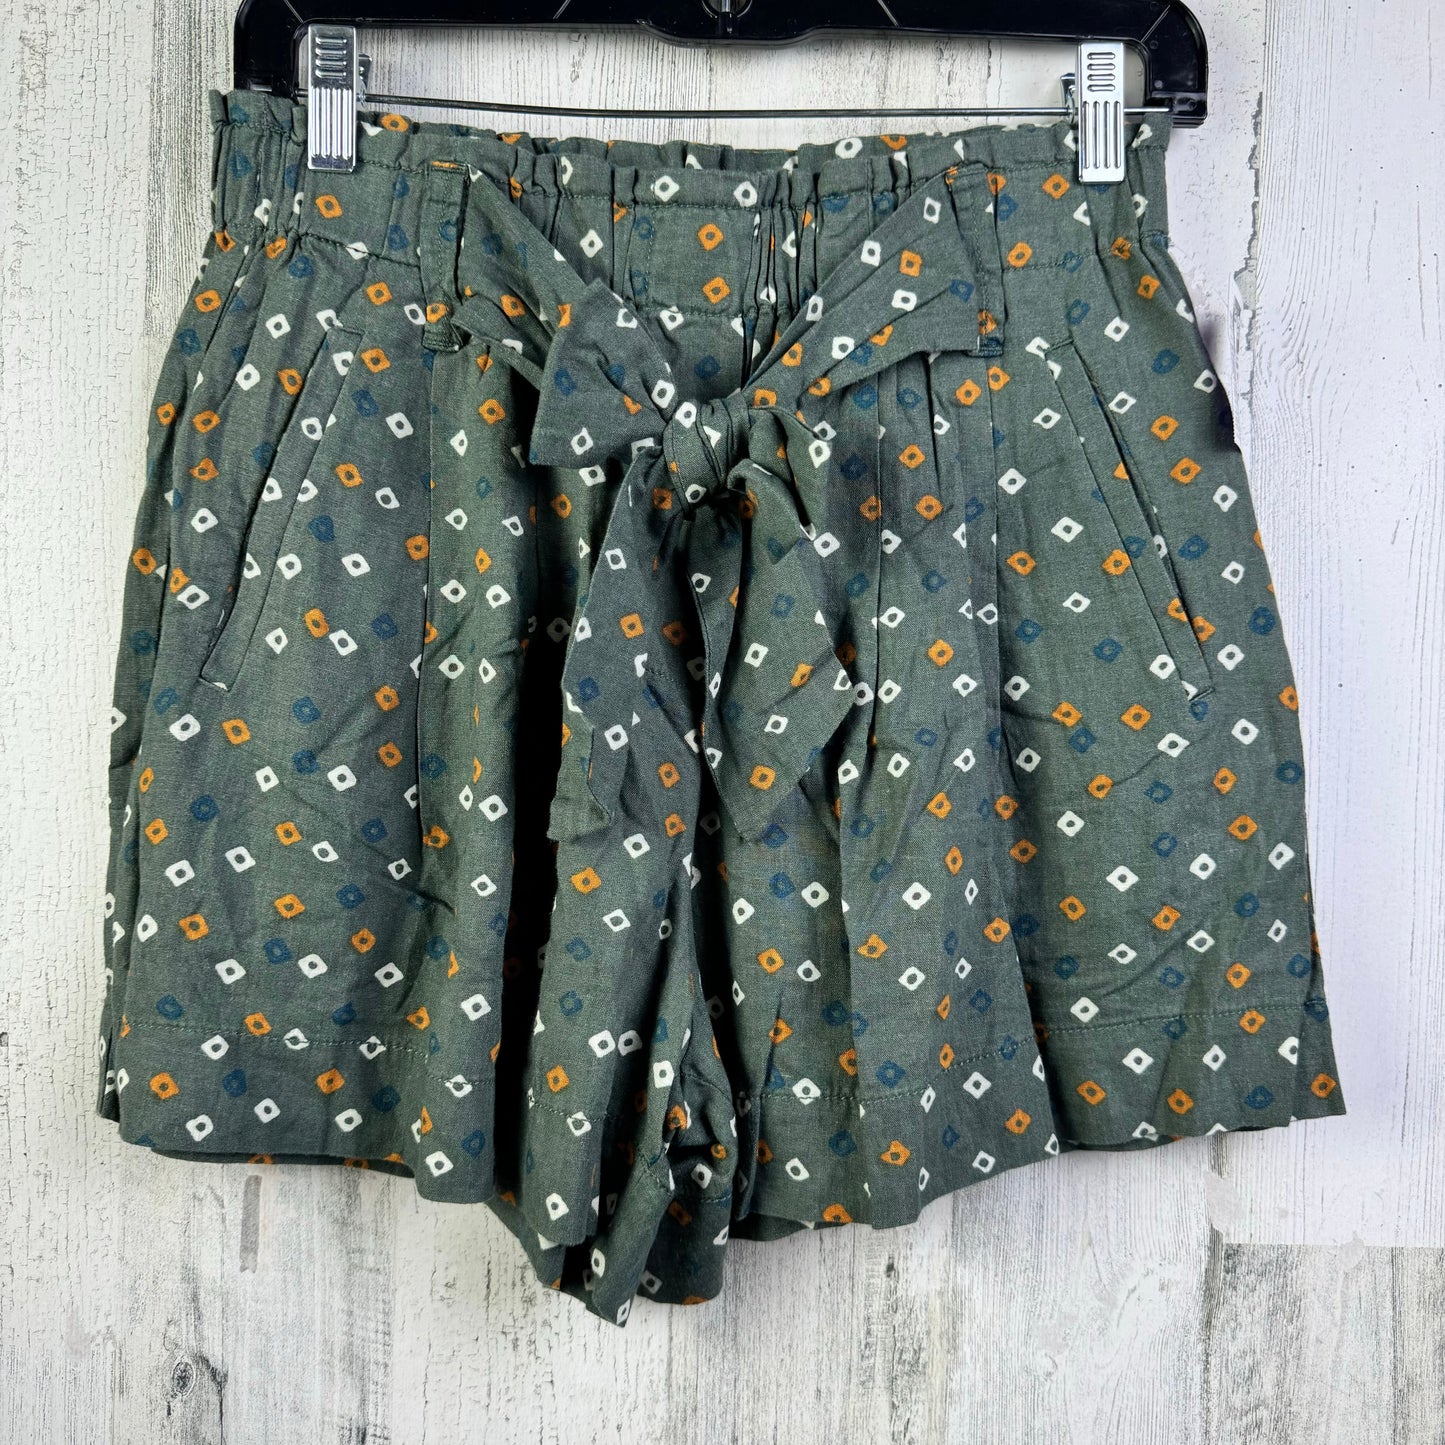 Green Shorts Anthropologie, Size 2